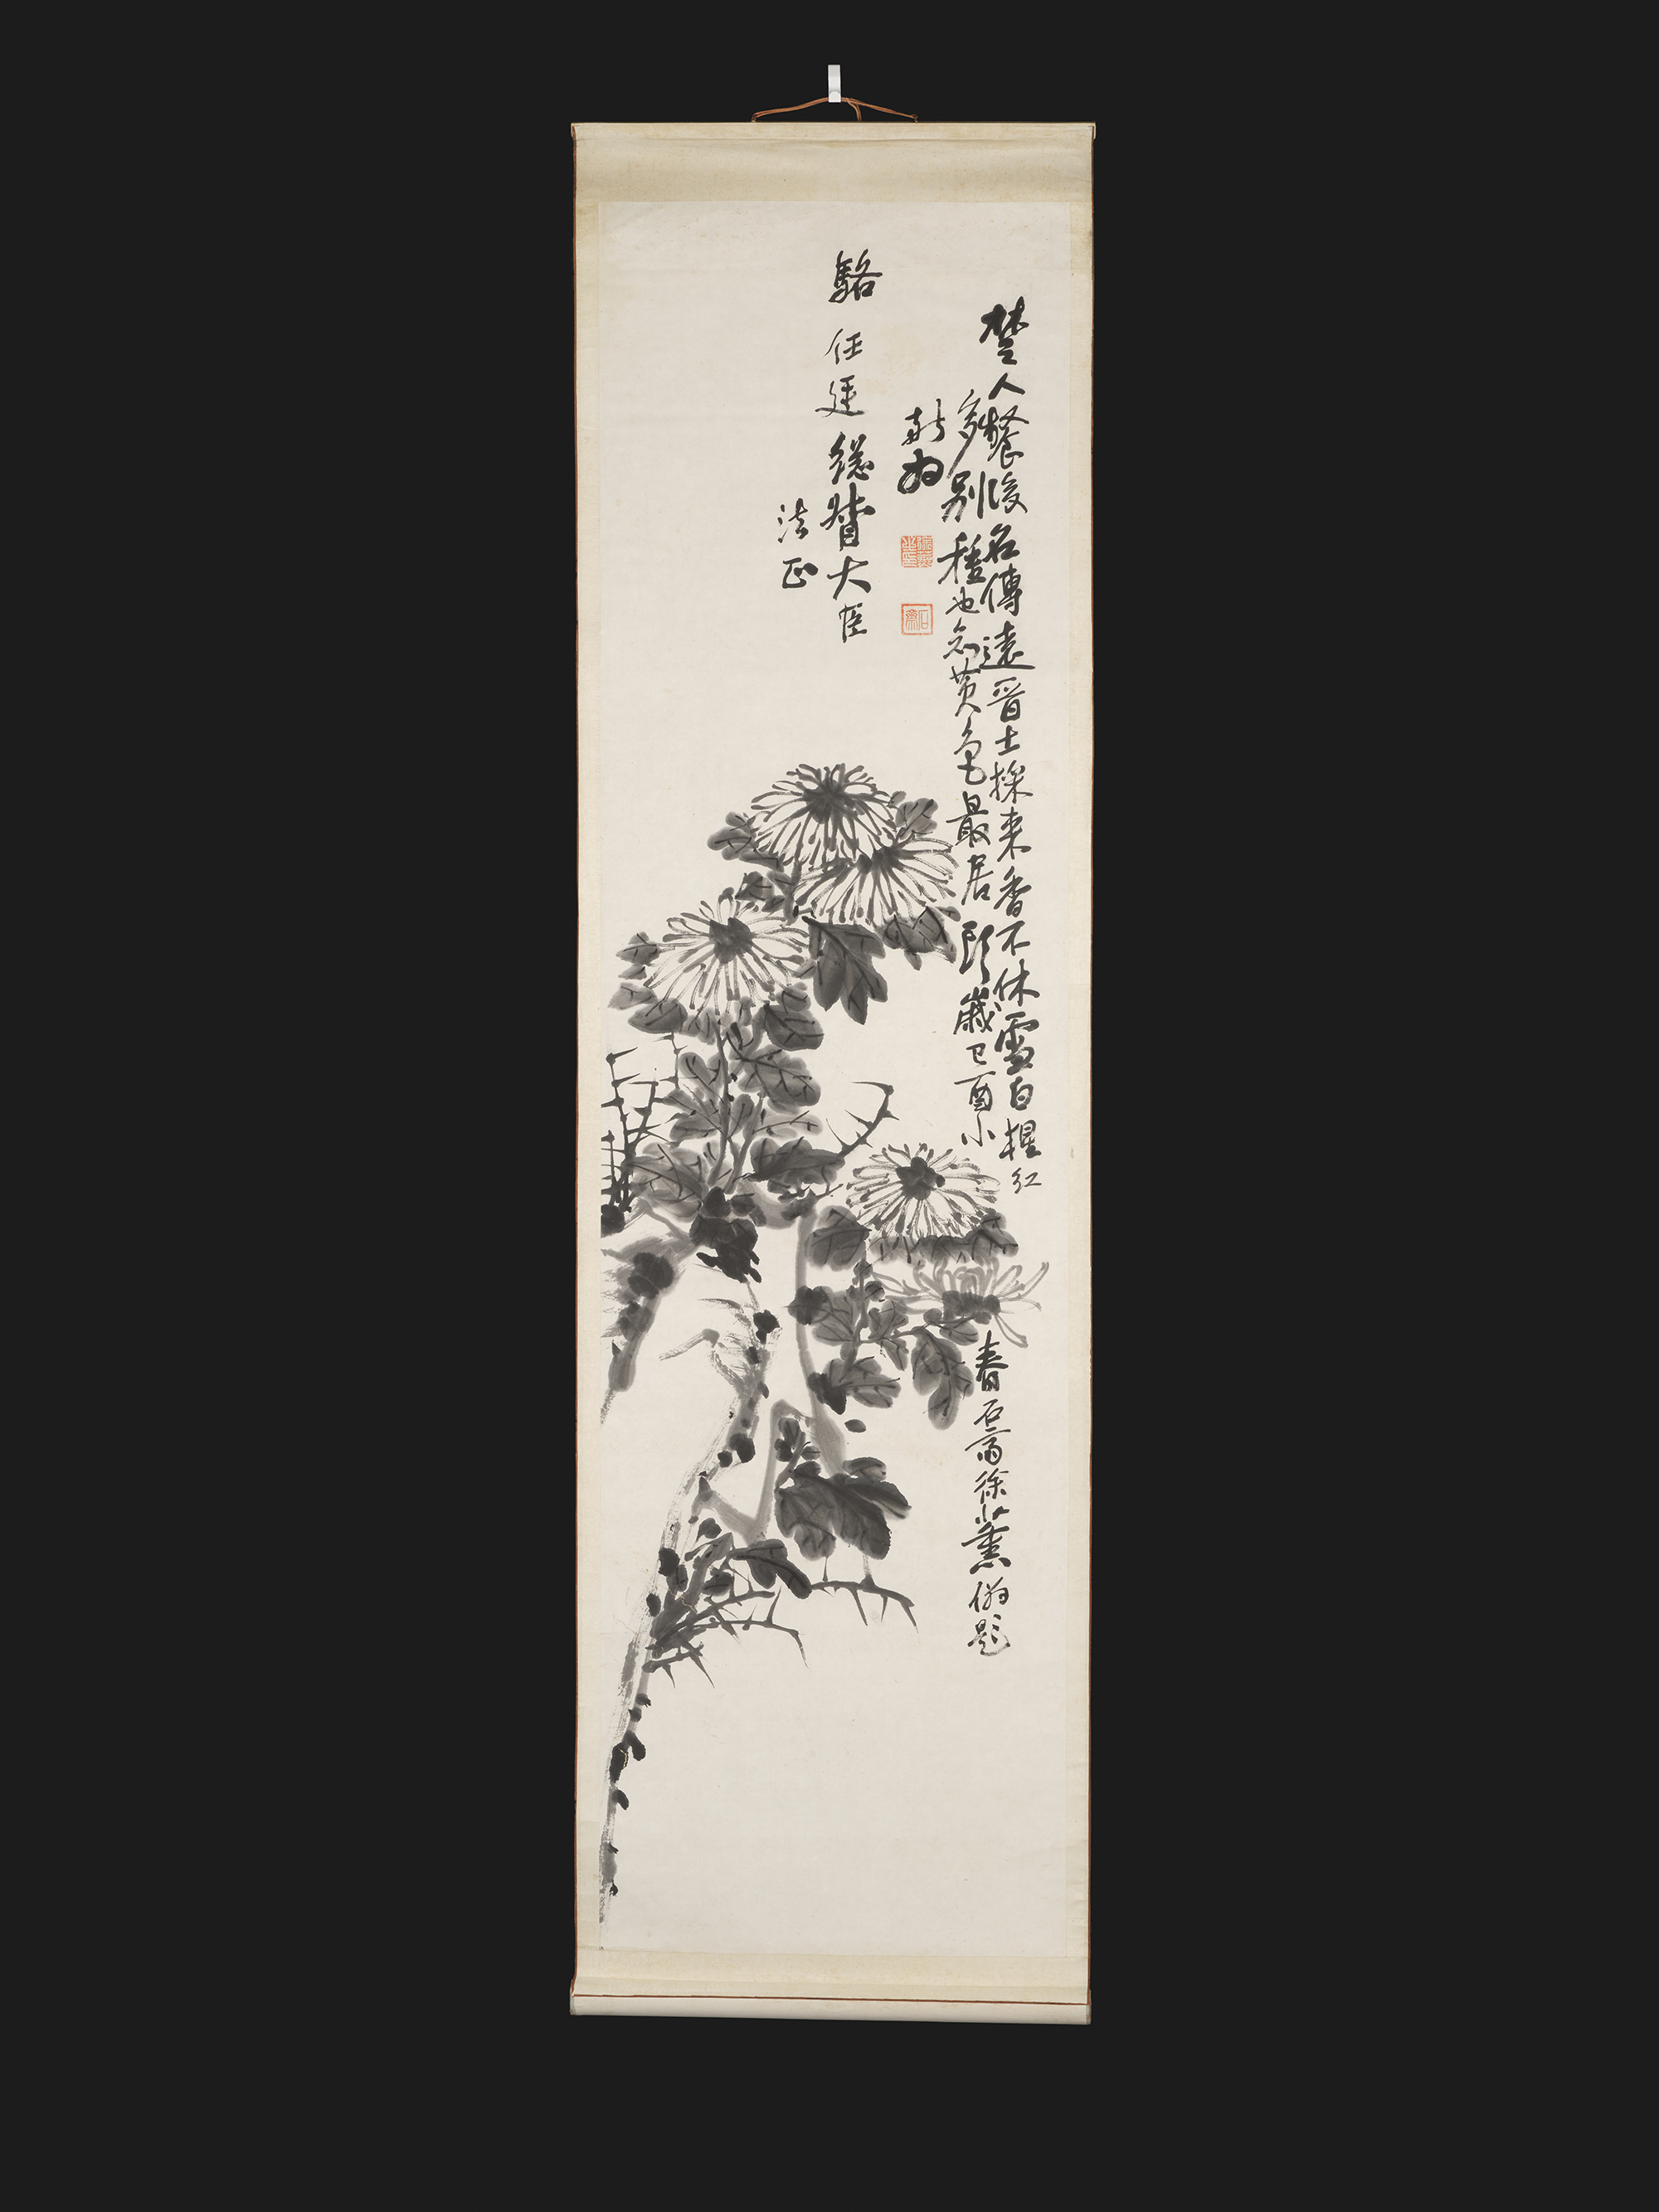 A hanging scroll painting, depicting a rock and chrysanthemums.